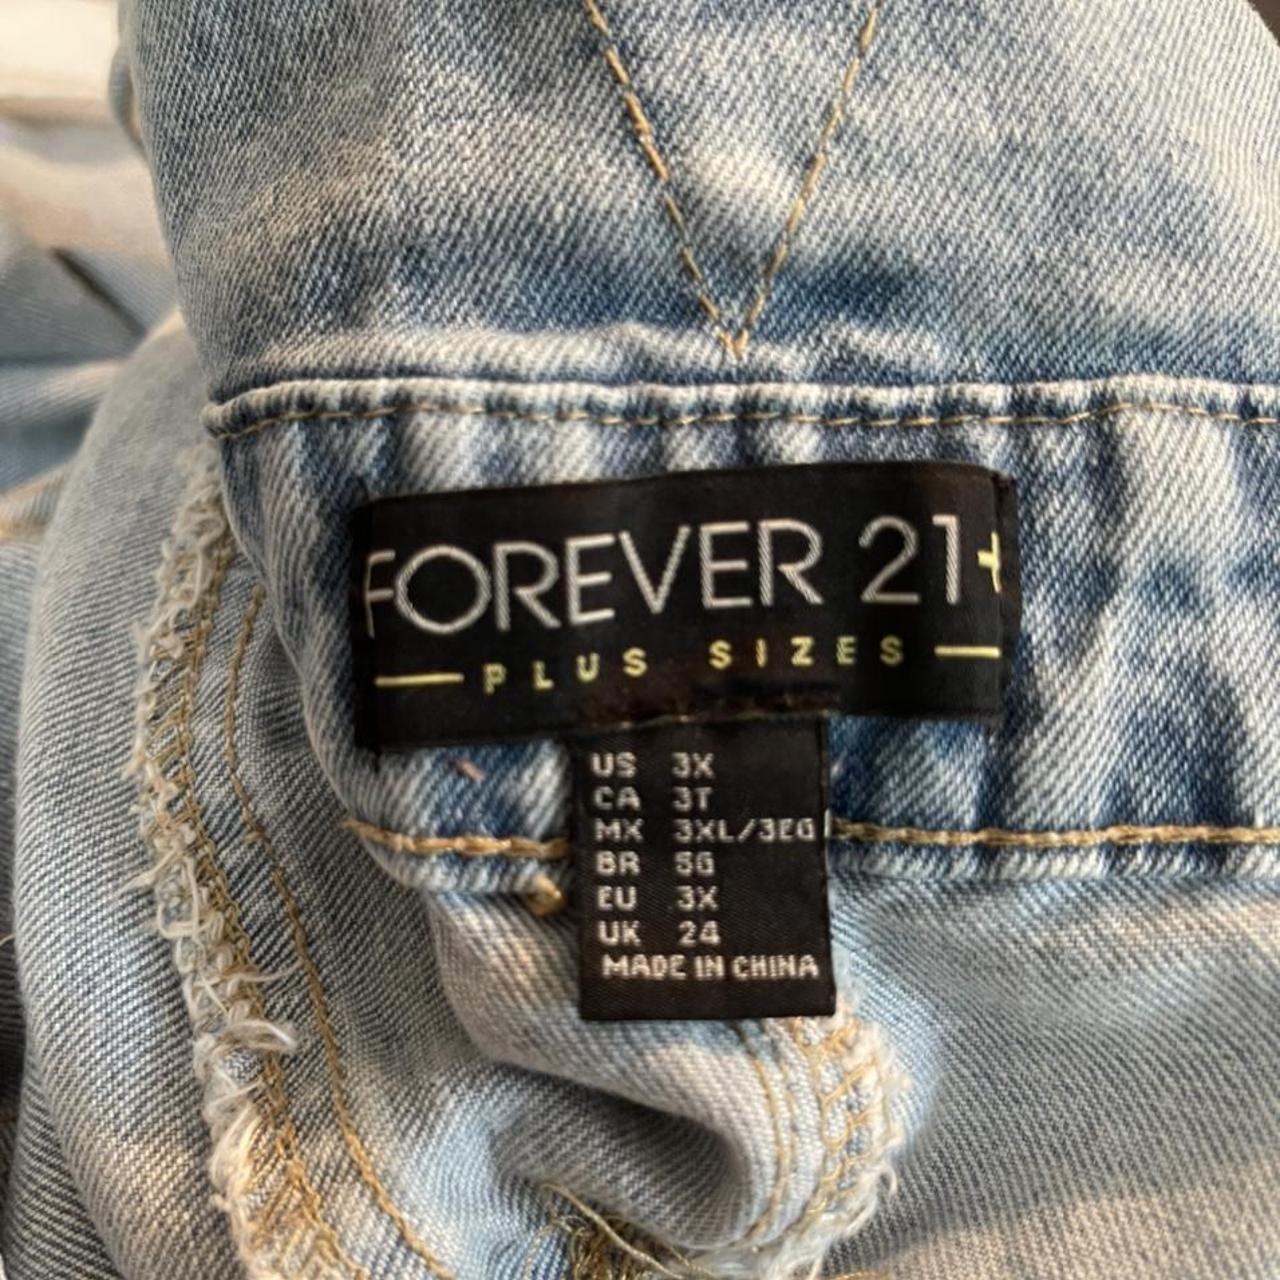 Product Image 3 - Forever21 Plus Size Denim Distressed